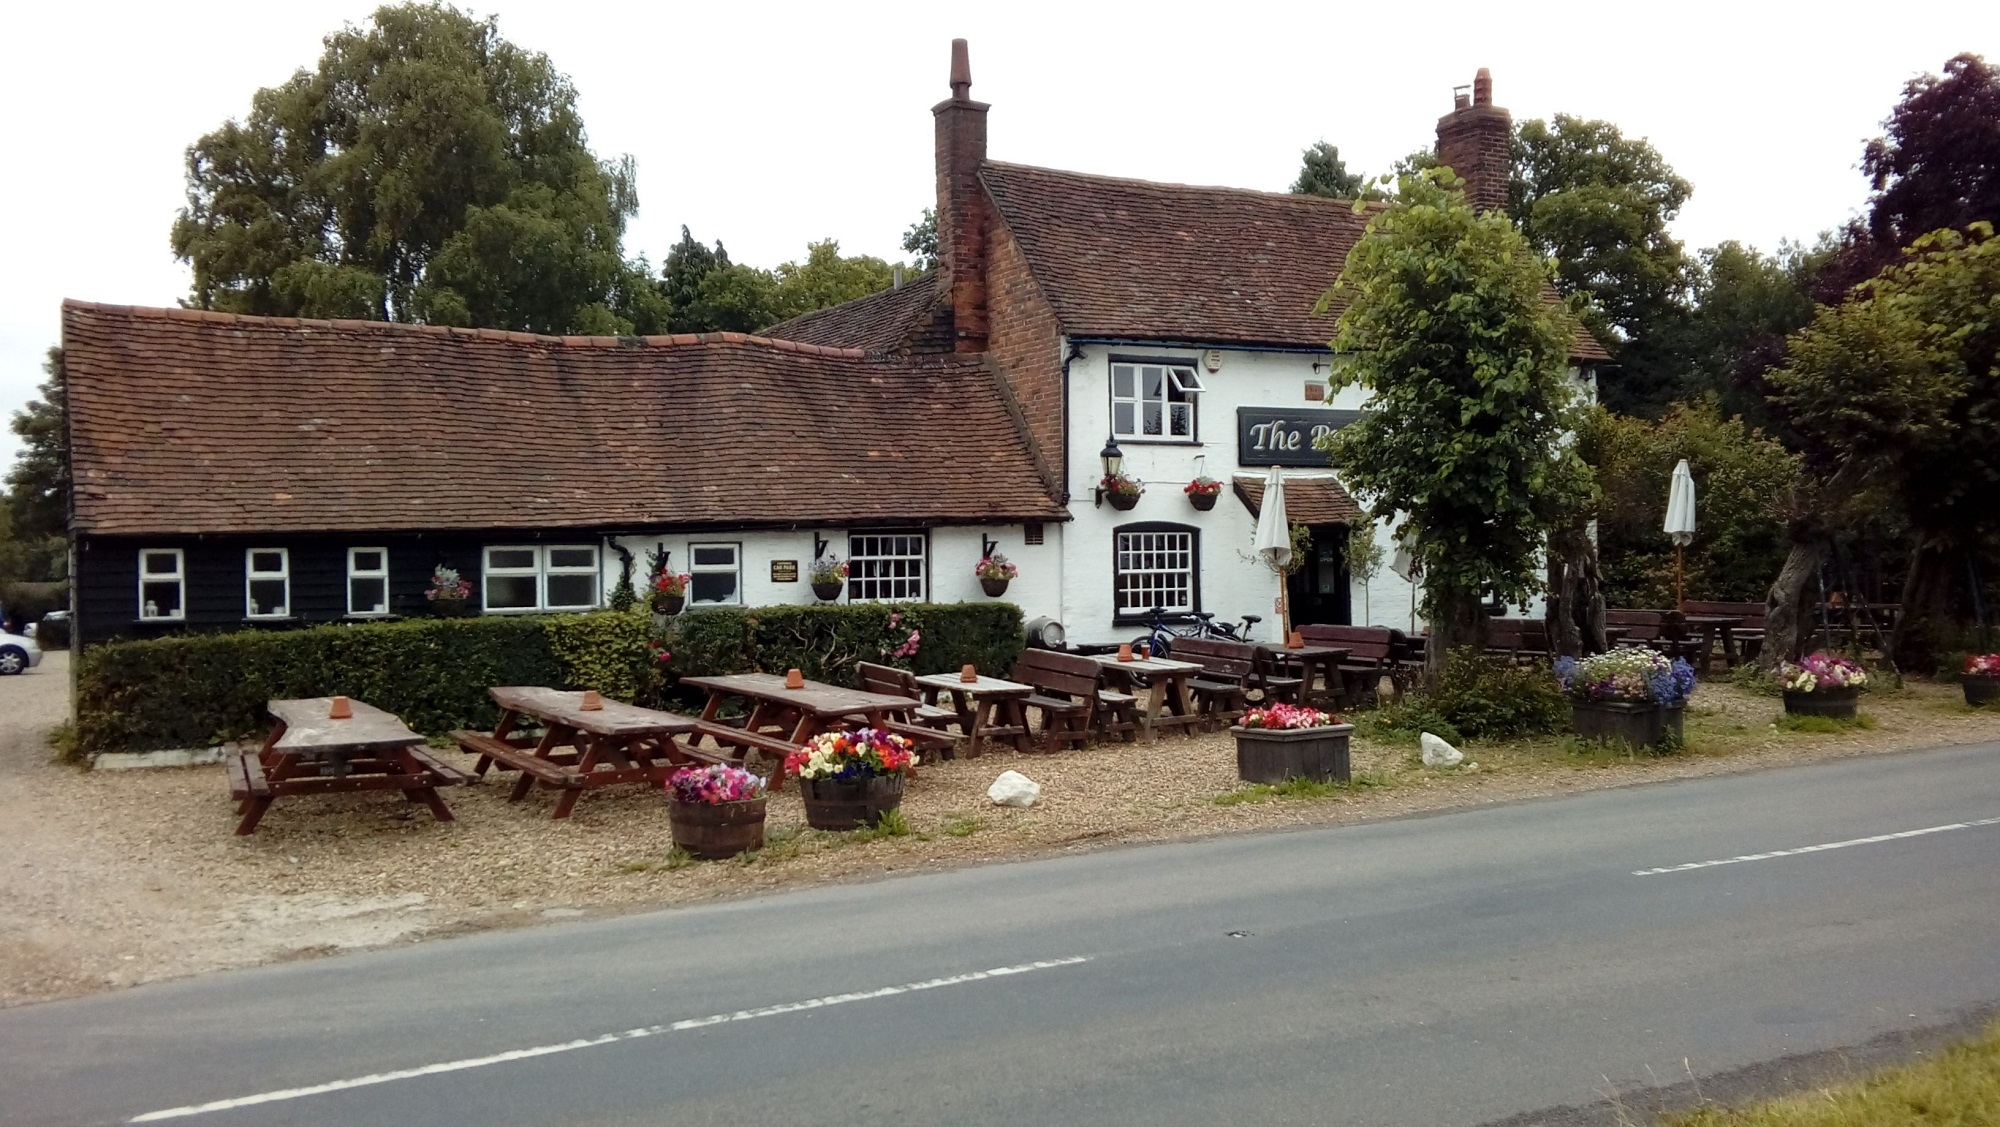 A long pub by a road with a gravel front garden area holding several benches, some large flower pots and a small tree.